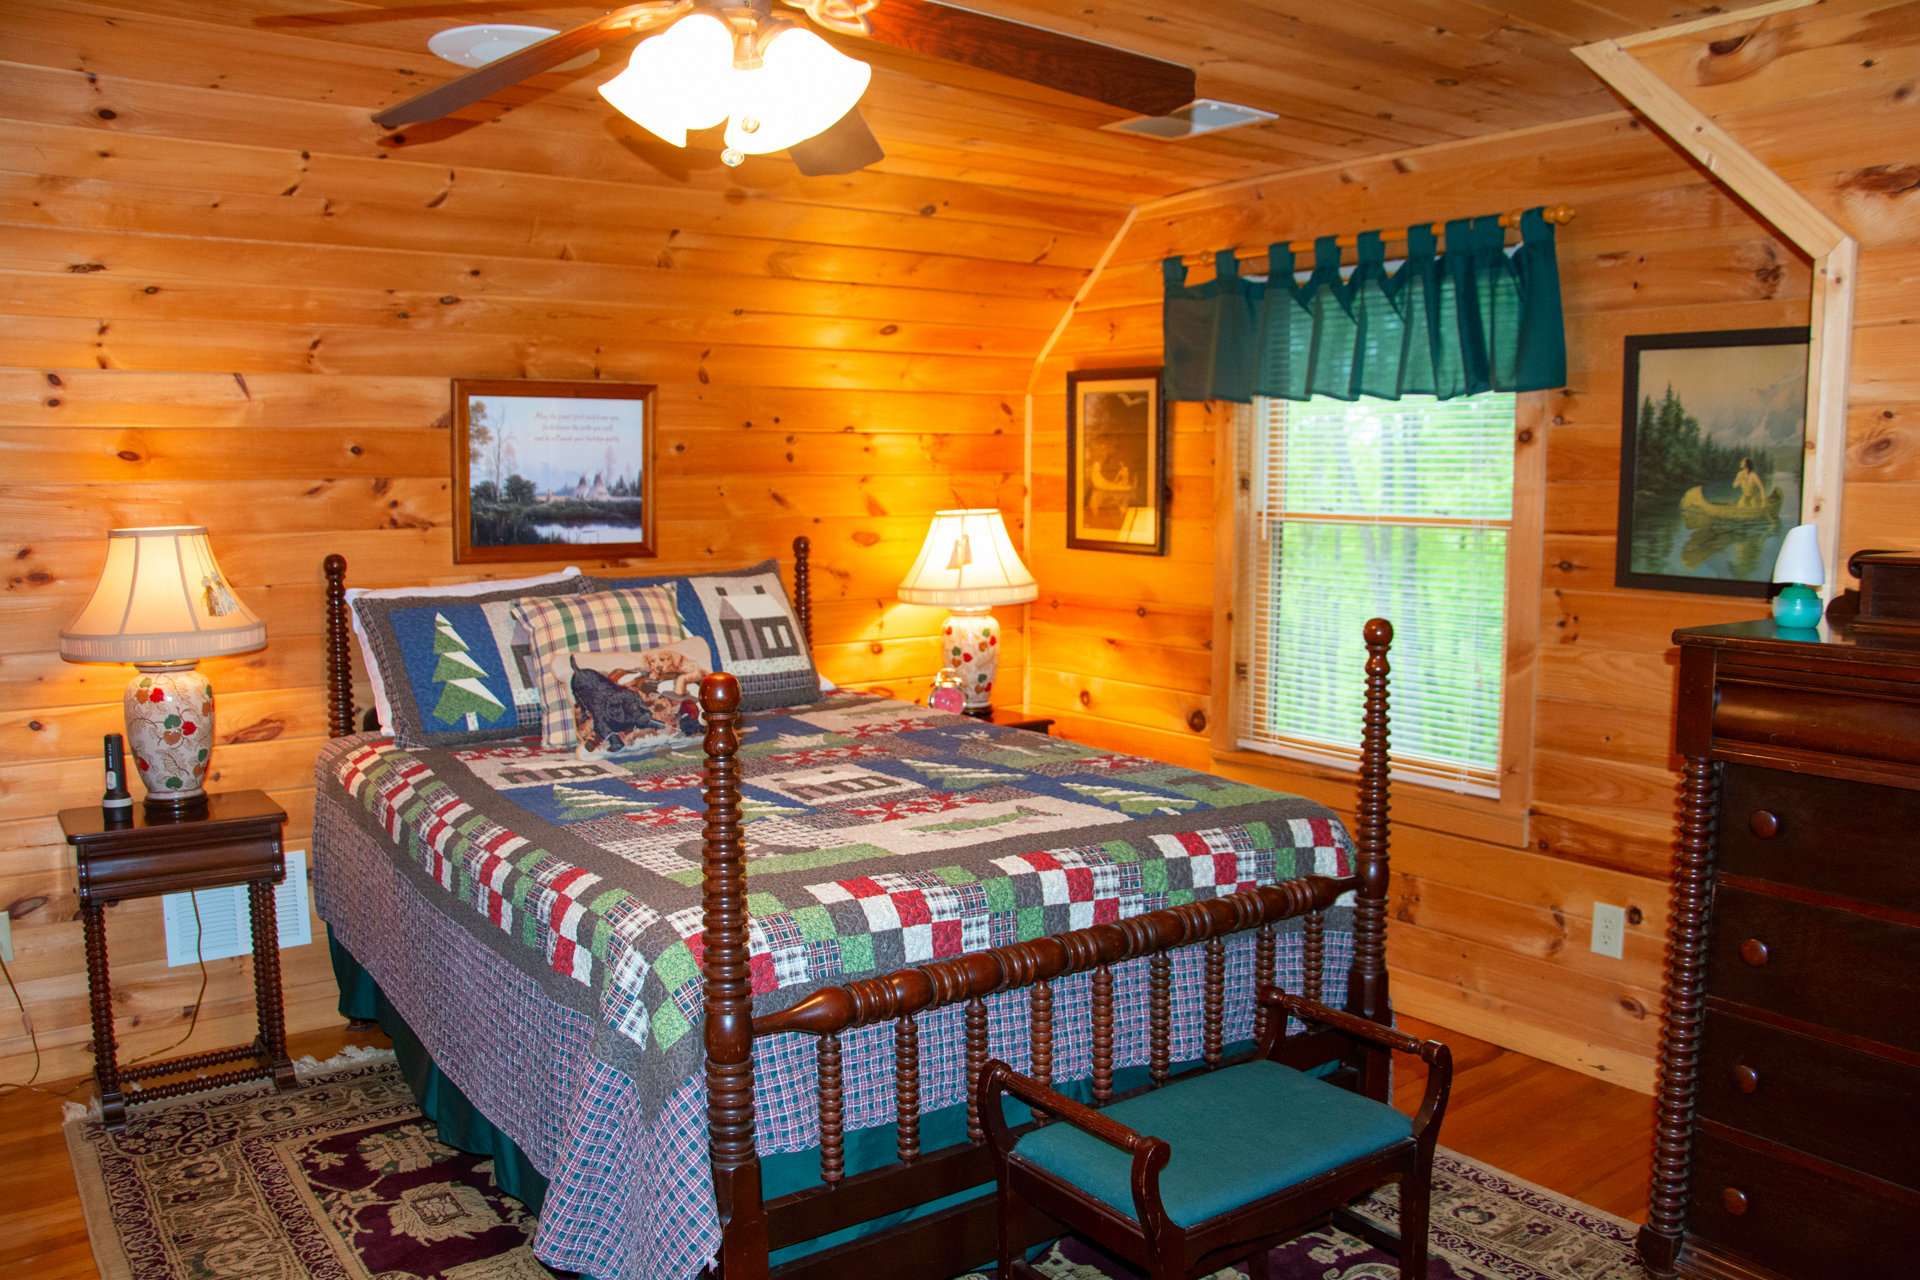 The upper level is also home to the spacious guest bedroom and full bath.